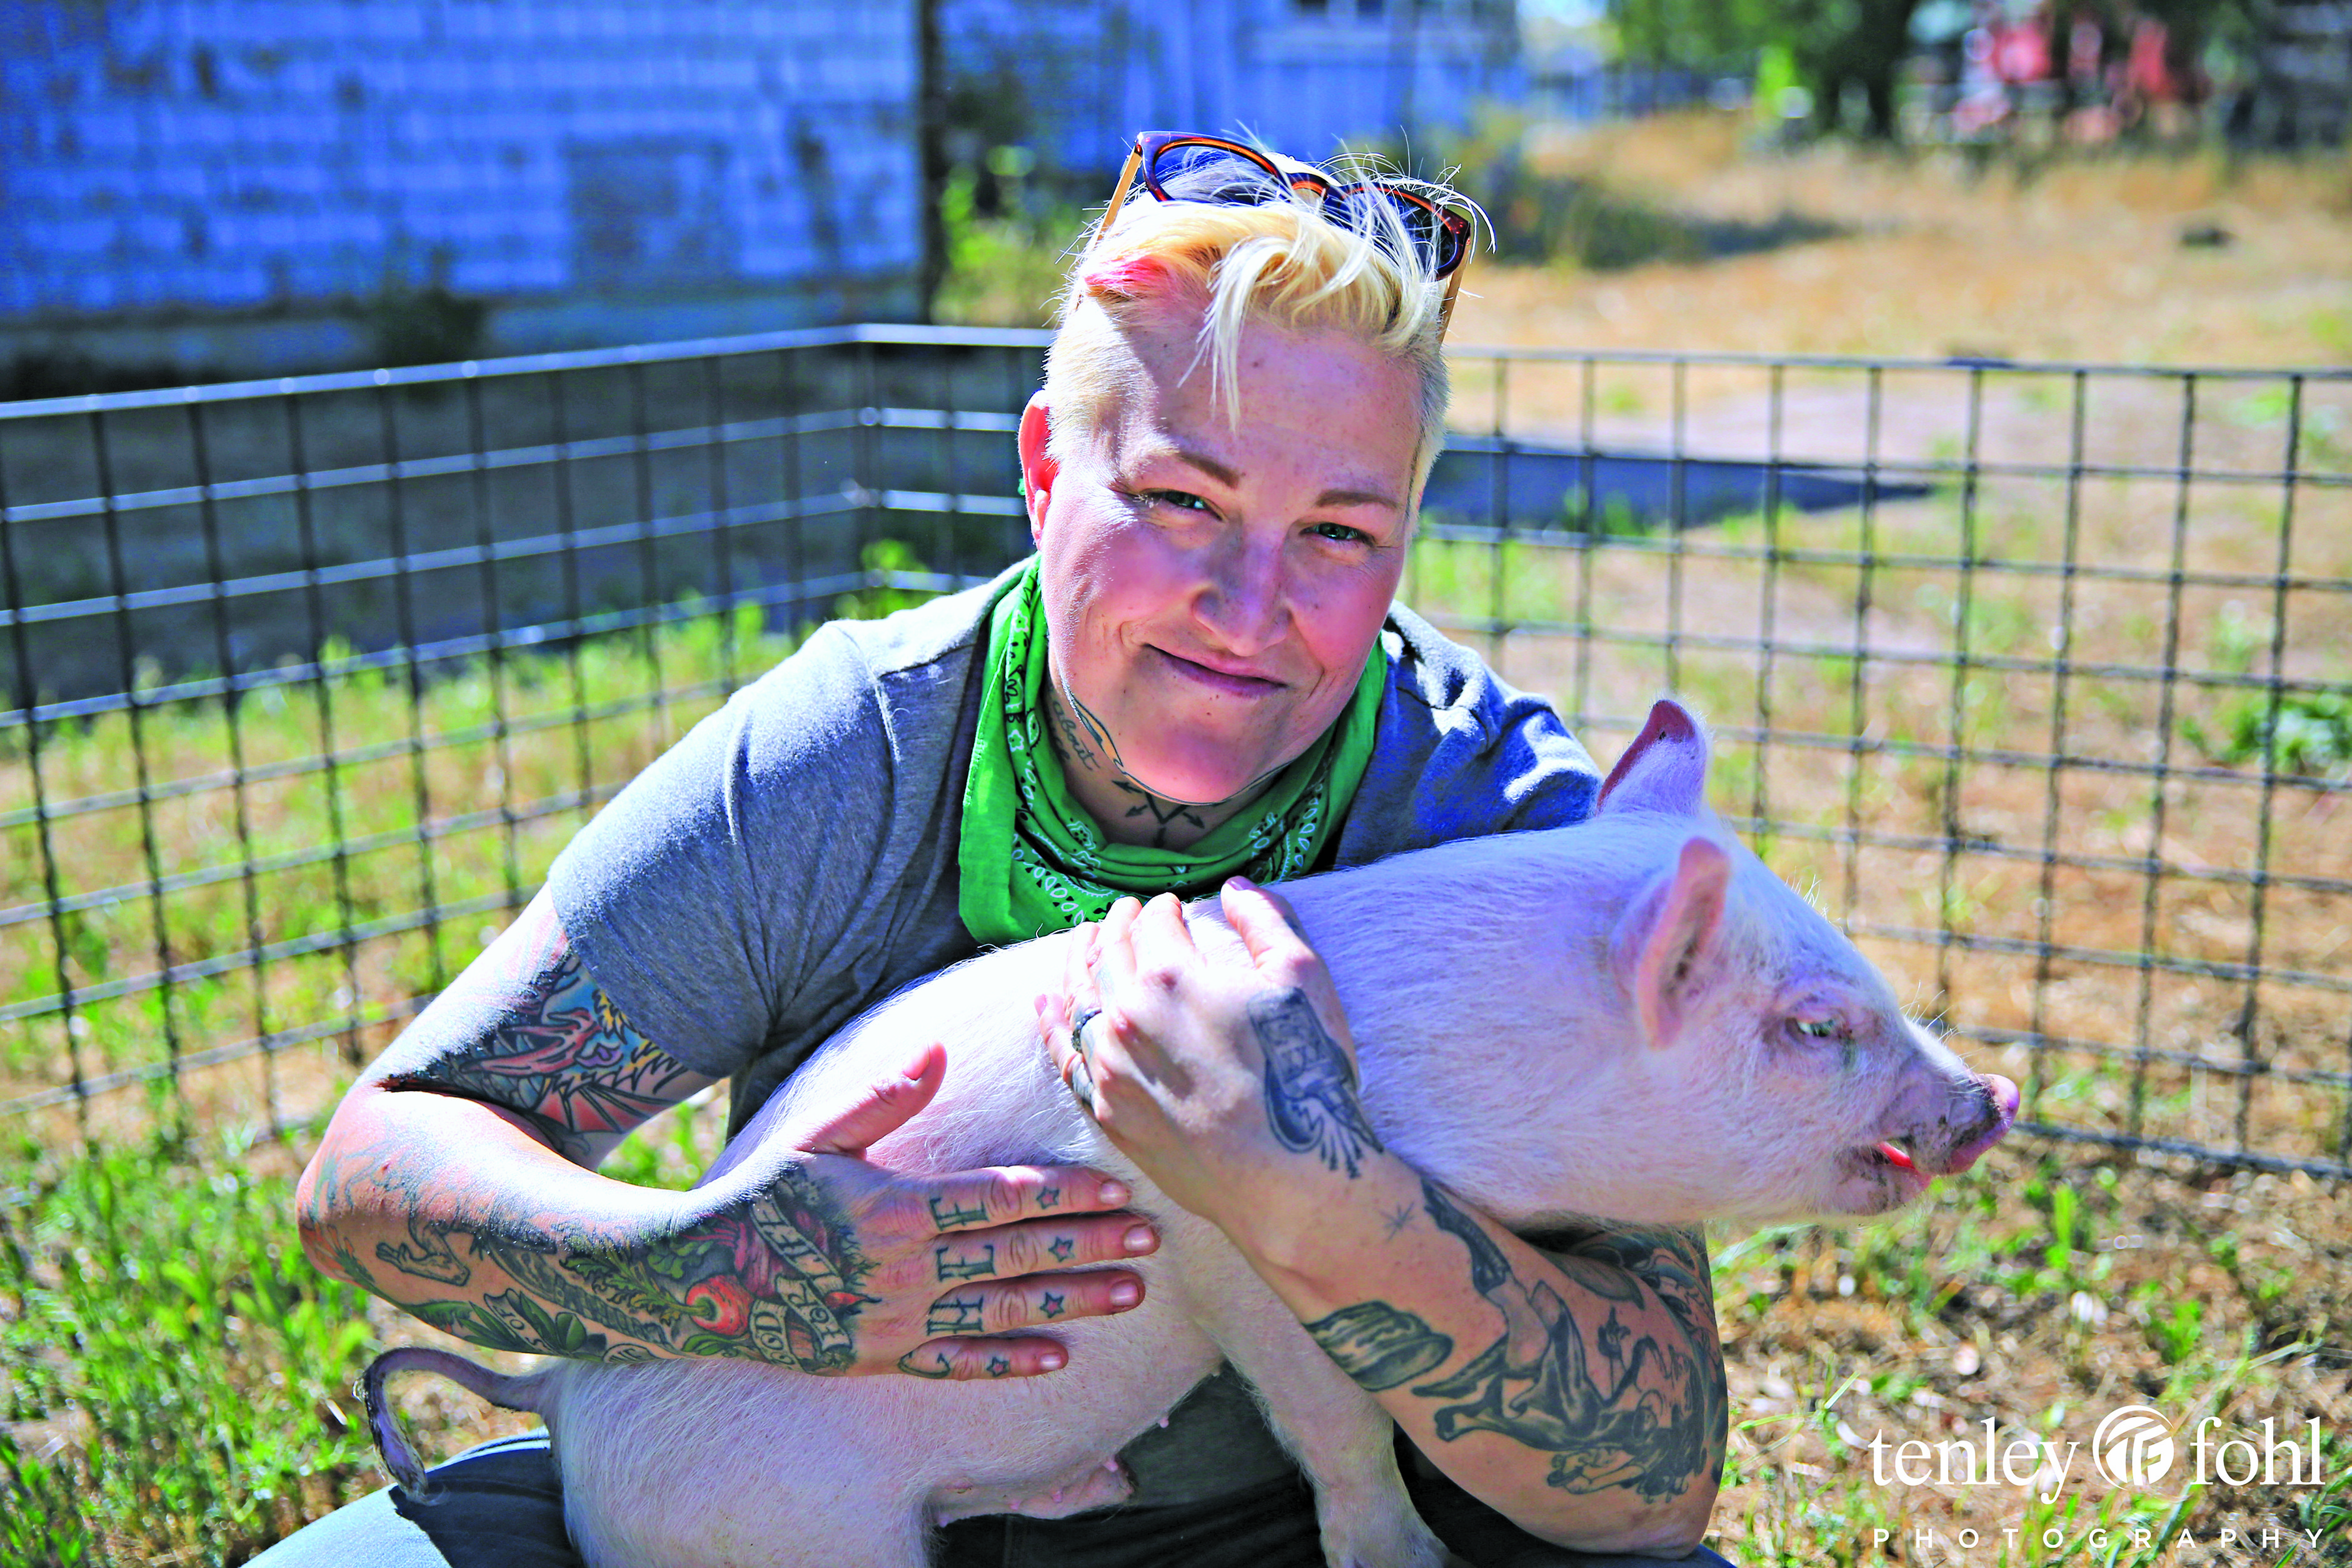 Documentary “Hungry” featuring Chef Pink of Bacon and Brine airs Thursday